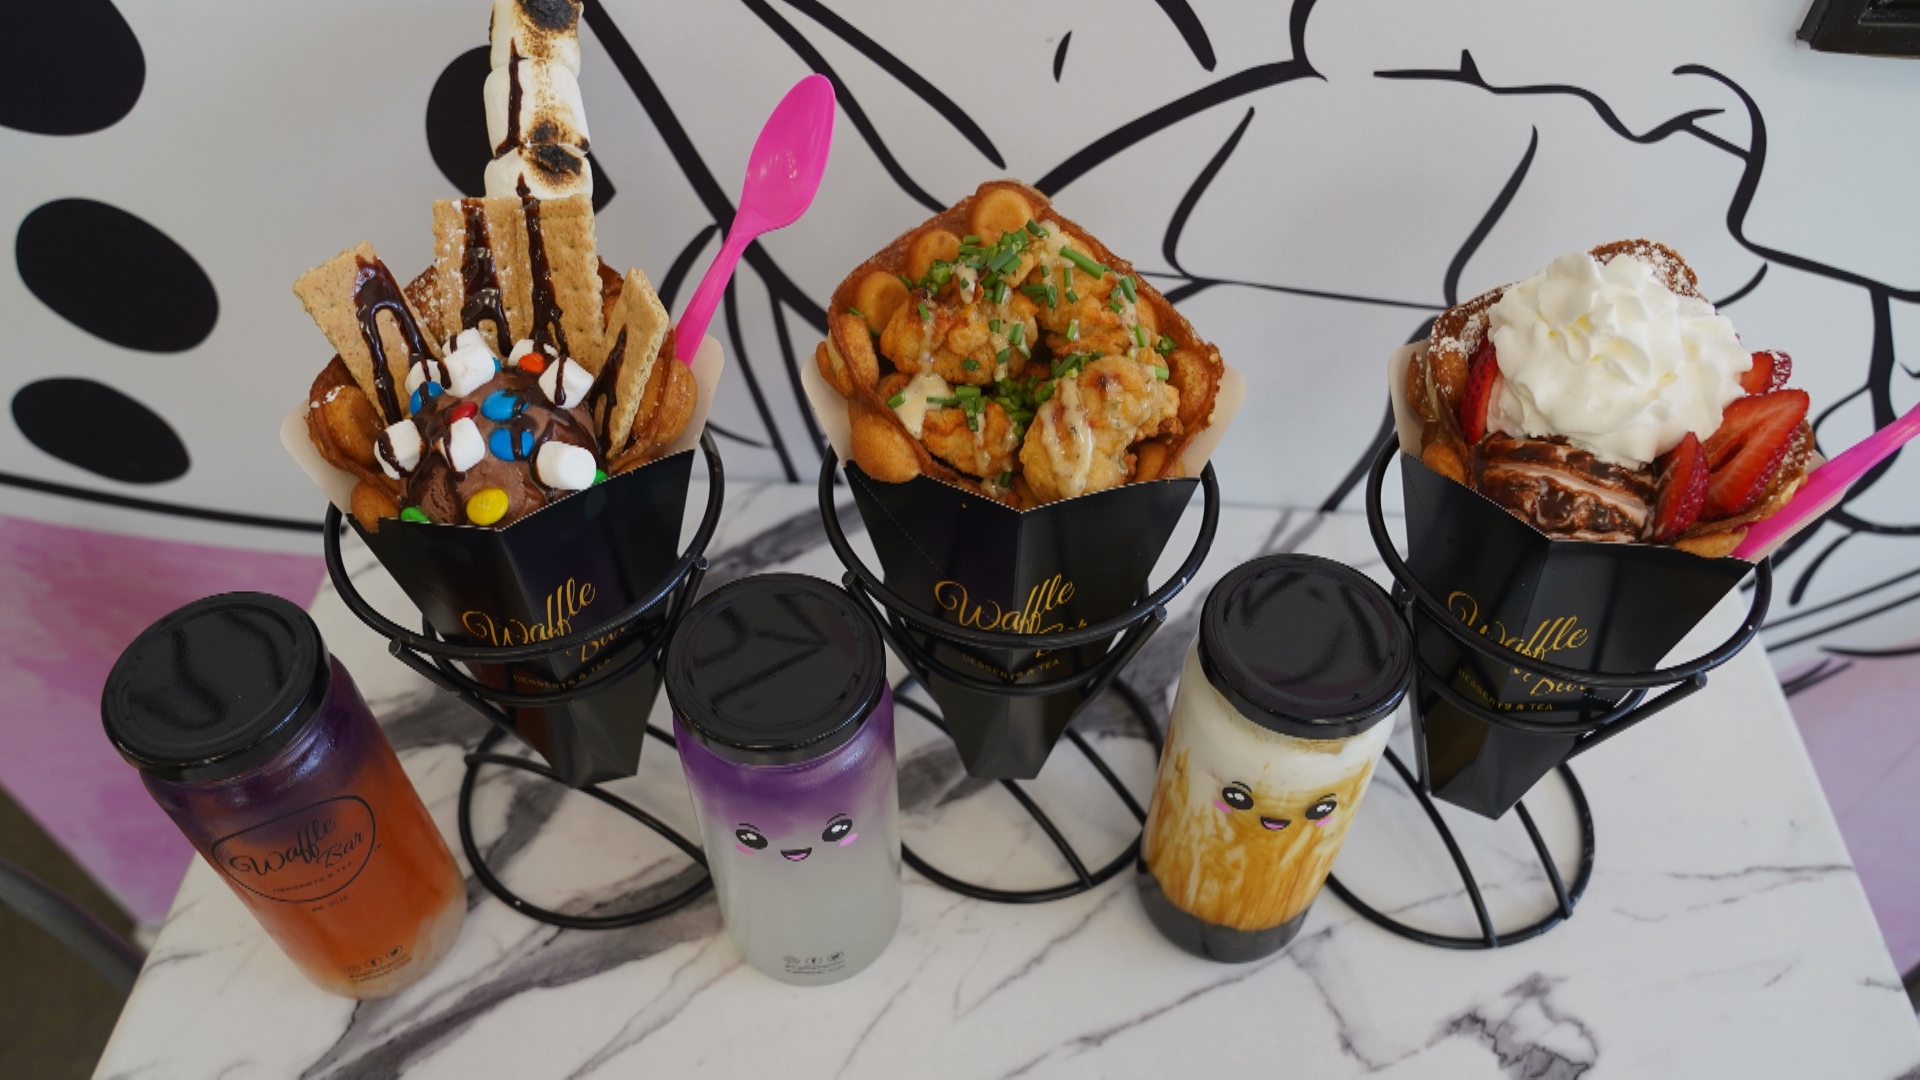 Waffle Bar in Bloomington will hold its grand opening Saturday morning. The first 50 guests will get a signature bubble waffle for free.